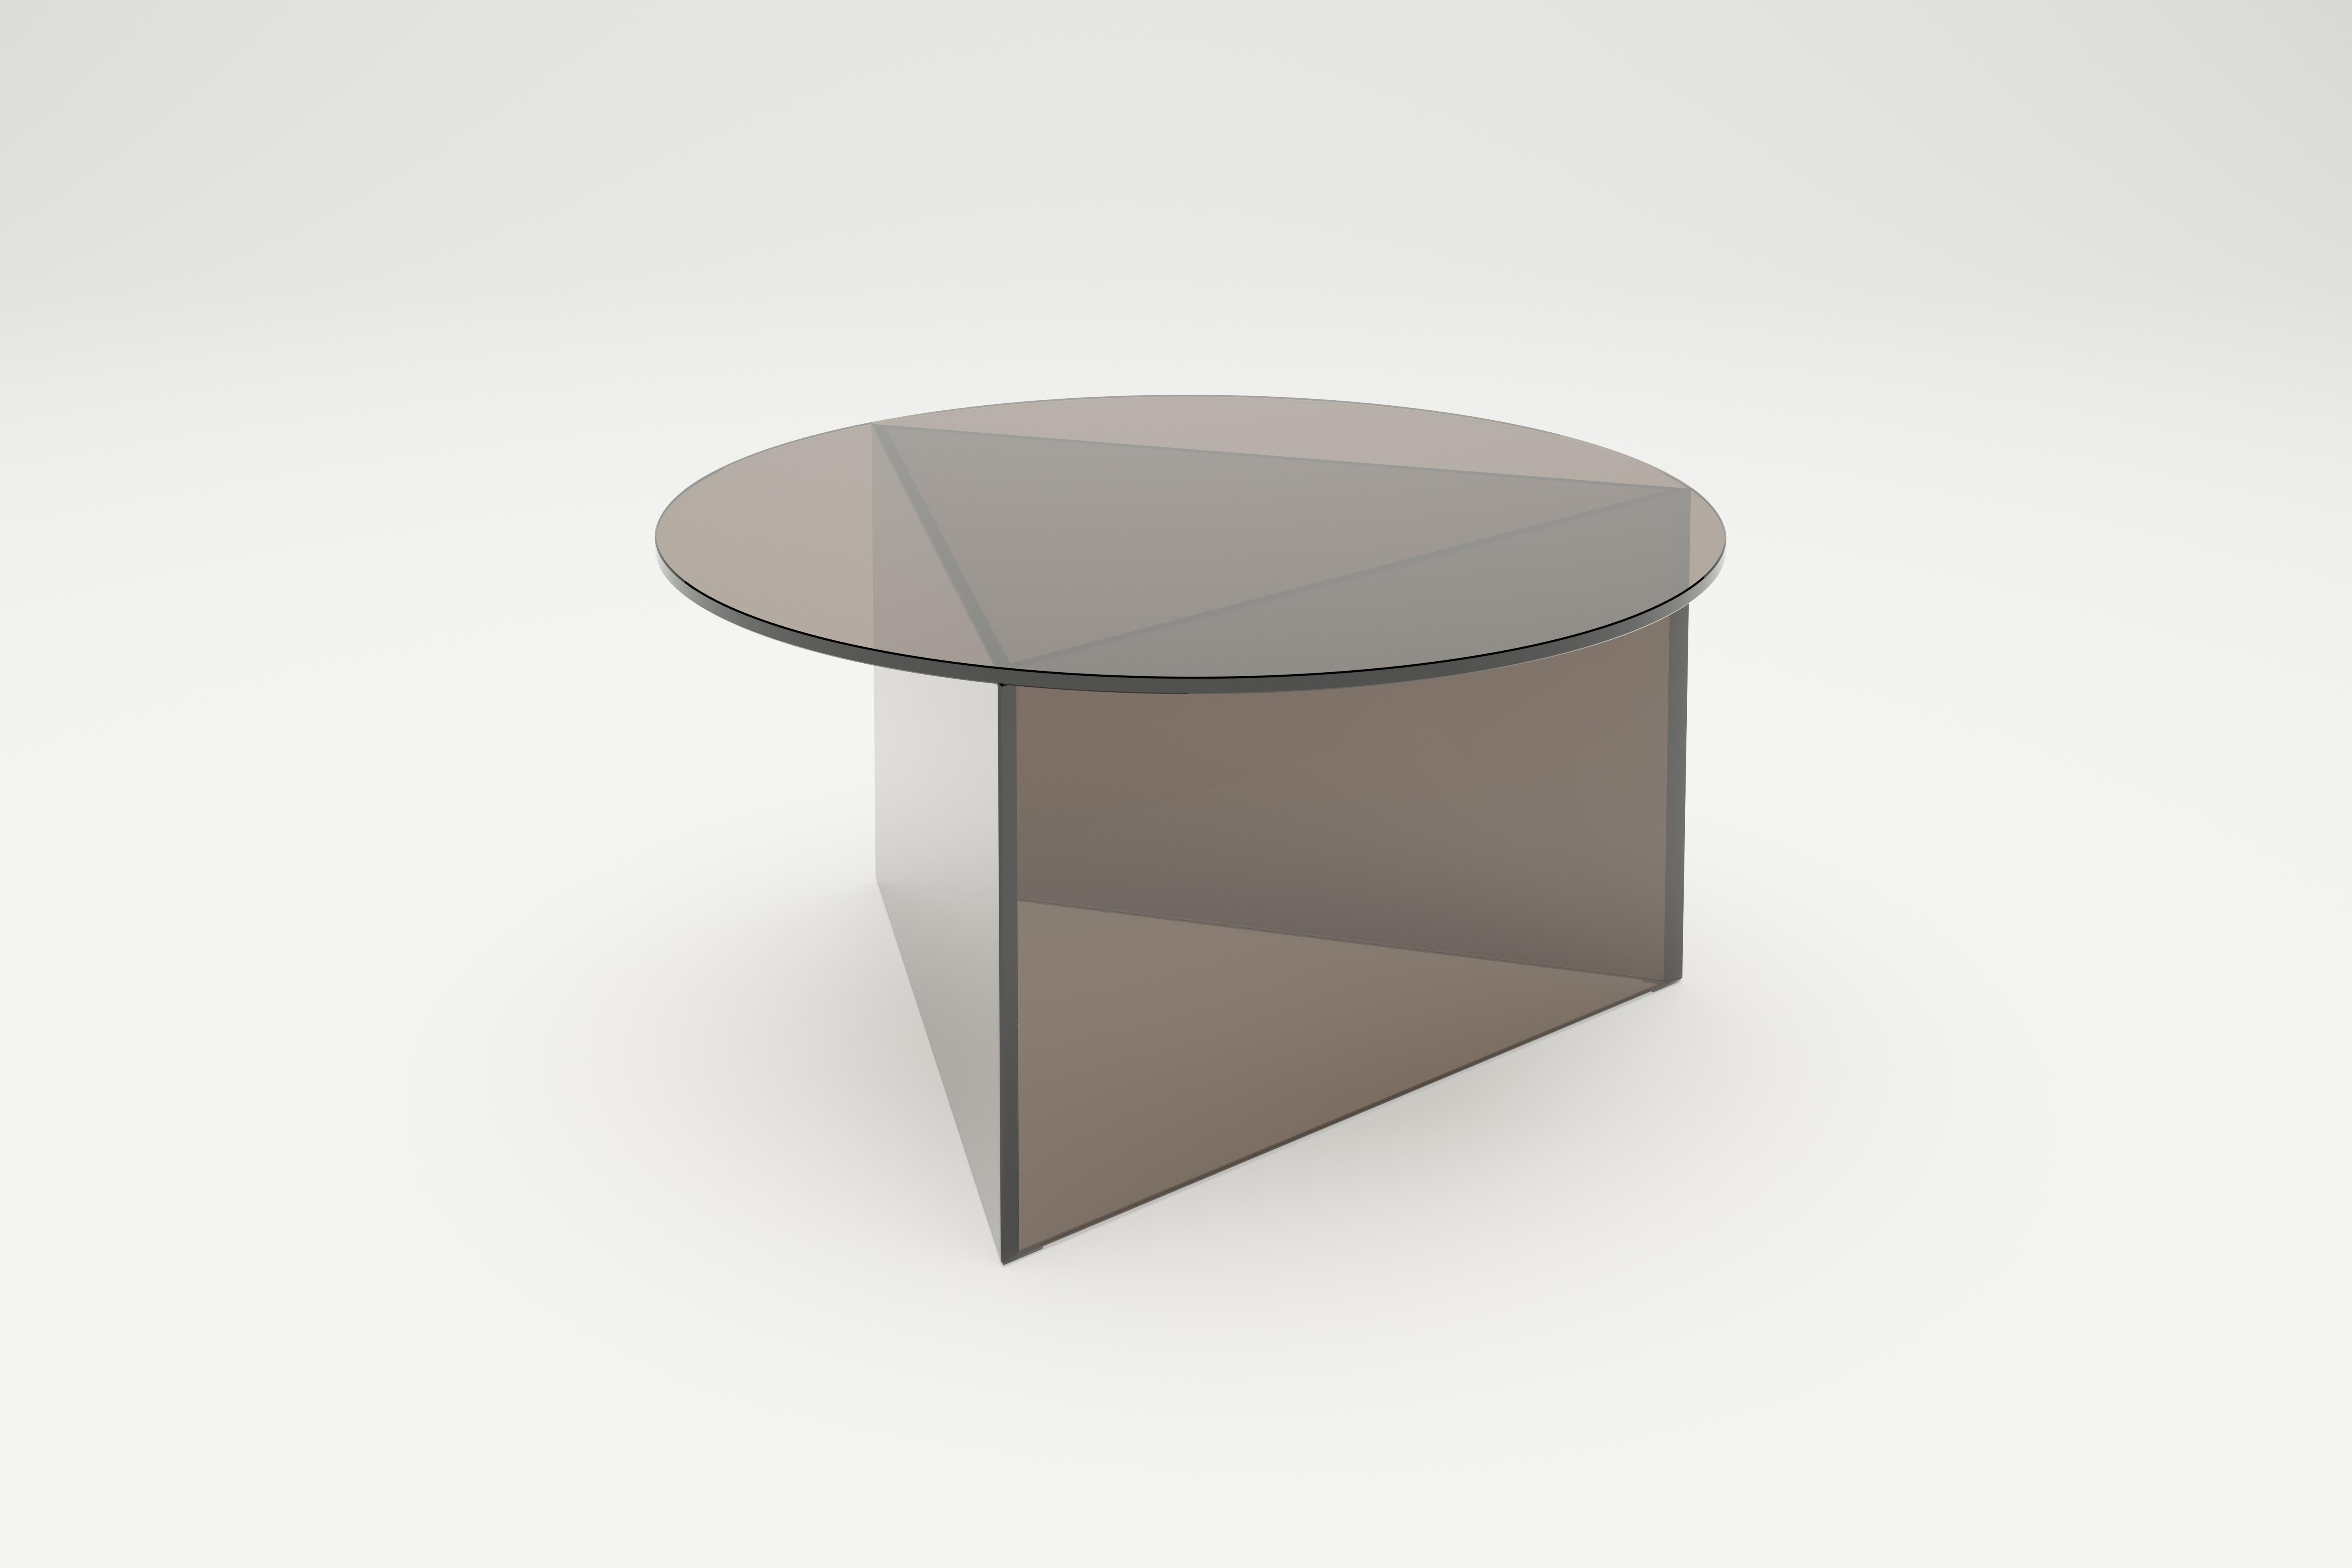 Clear glass prisma circle 80 coffe table by Sebastian Scherer.
Dimensions: D 80x H 40 cm.
Materials: solid colored glass.
Weight: 32.6 kg.
Also available: glass: clear white / clear green / clear blue / clear bronze / clear black / satin white /